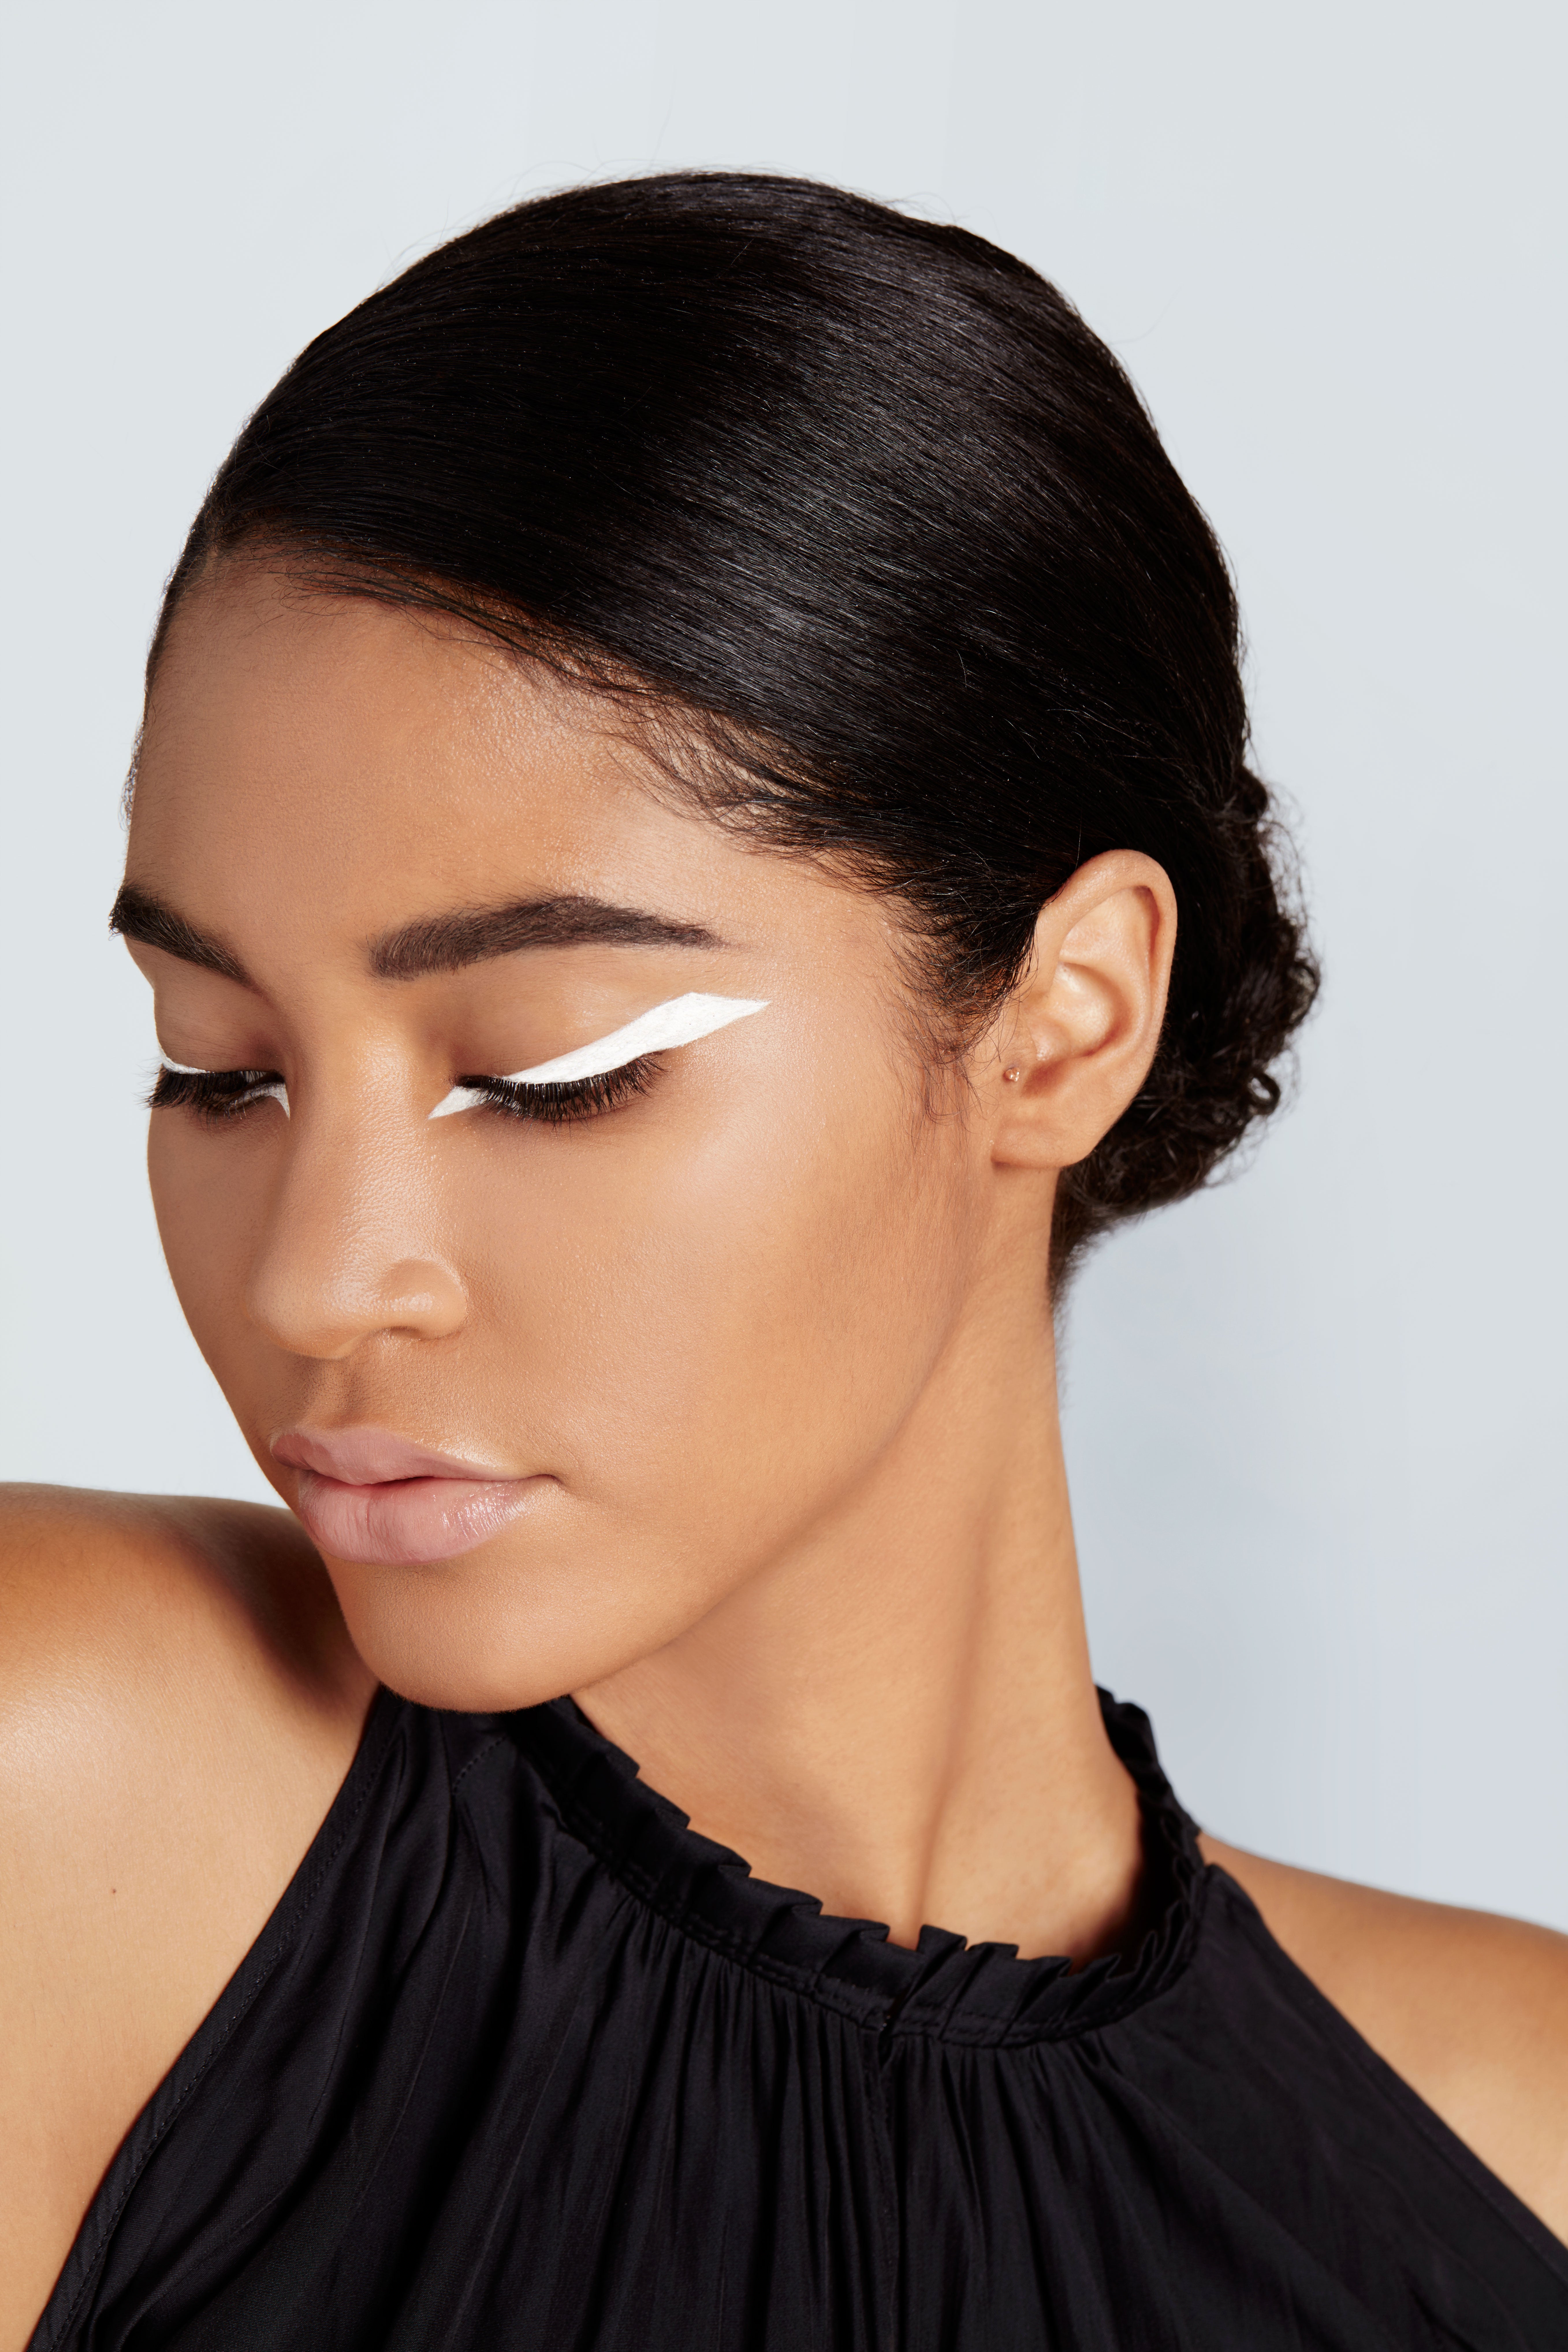 Four Funky Cat Eye Looks That Are Perfect For the Holidays
